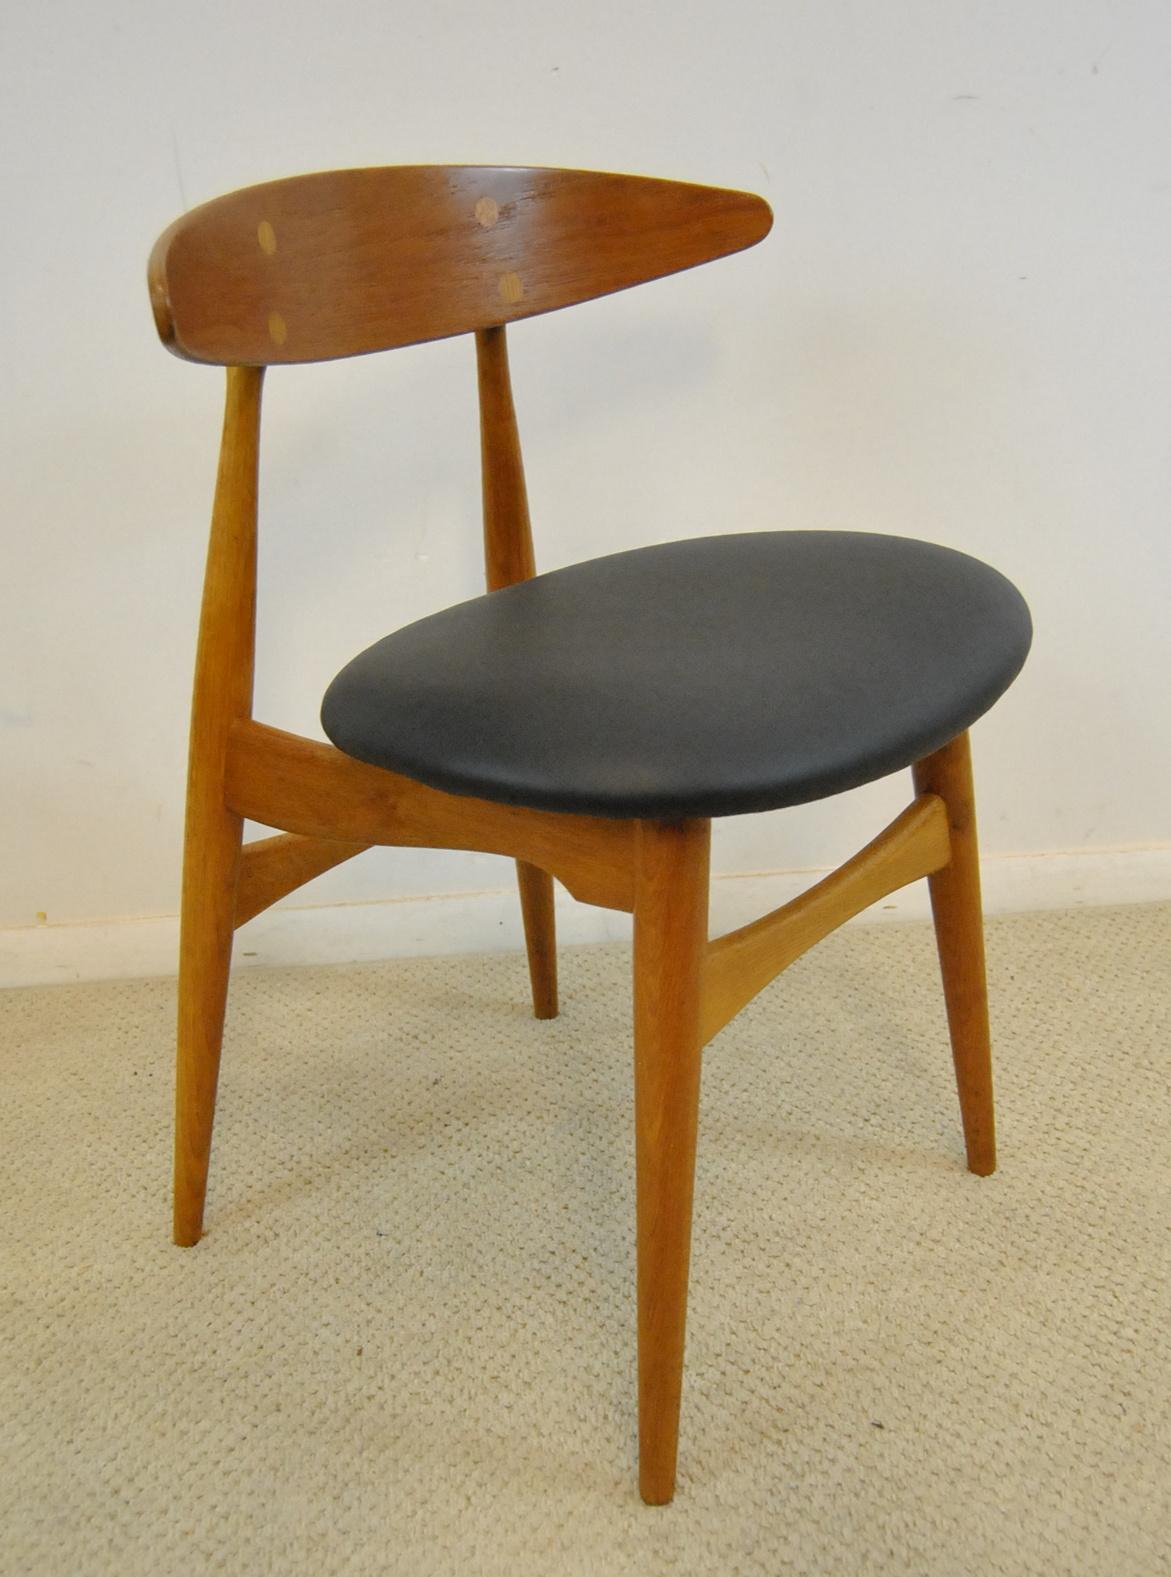 A great set of four dining chairs designed by Hans Wegner. This is the iconic Model CH33 designed for Carl Hansen & Son, Denmark. Clearly marked as pictured. Black leather seats in great condition.